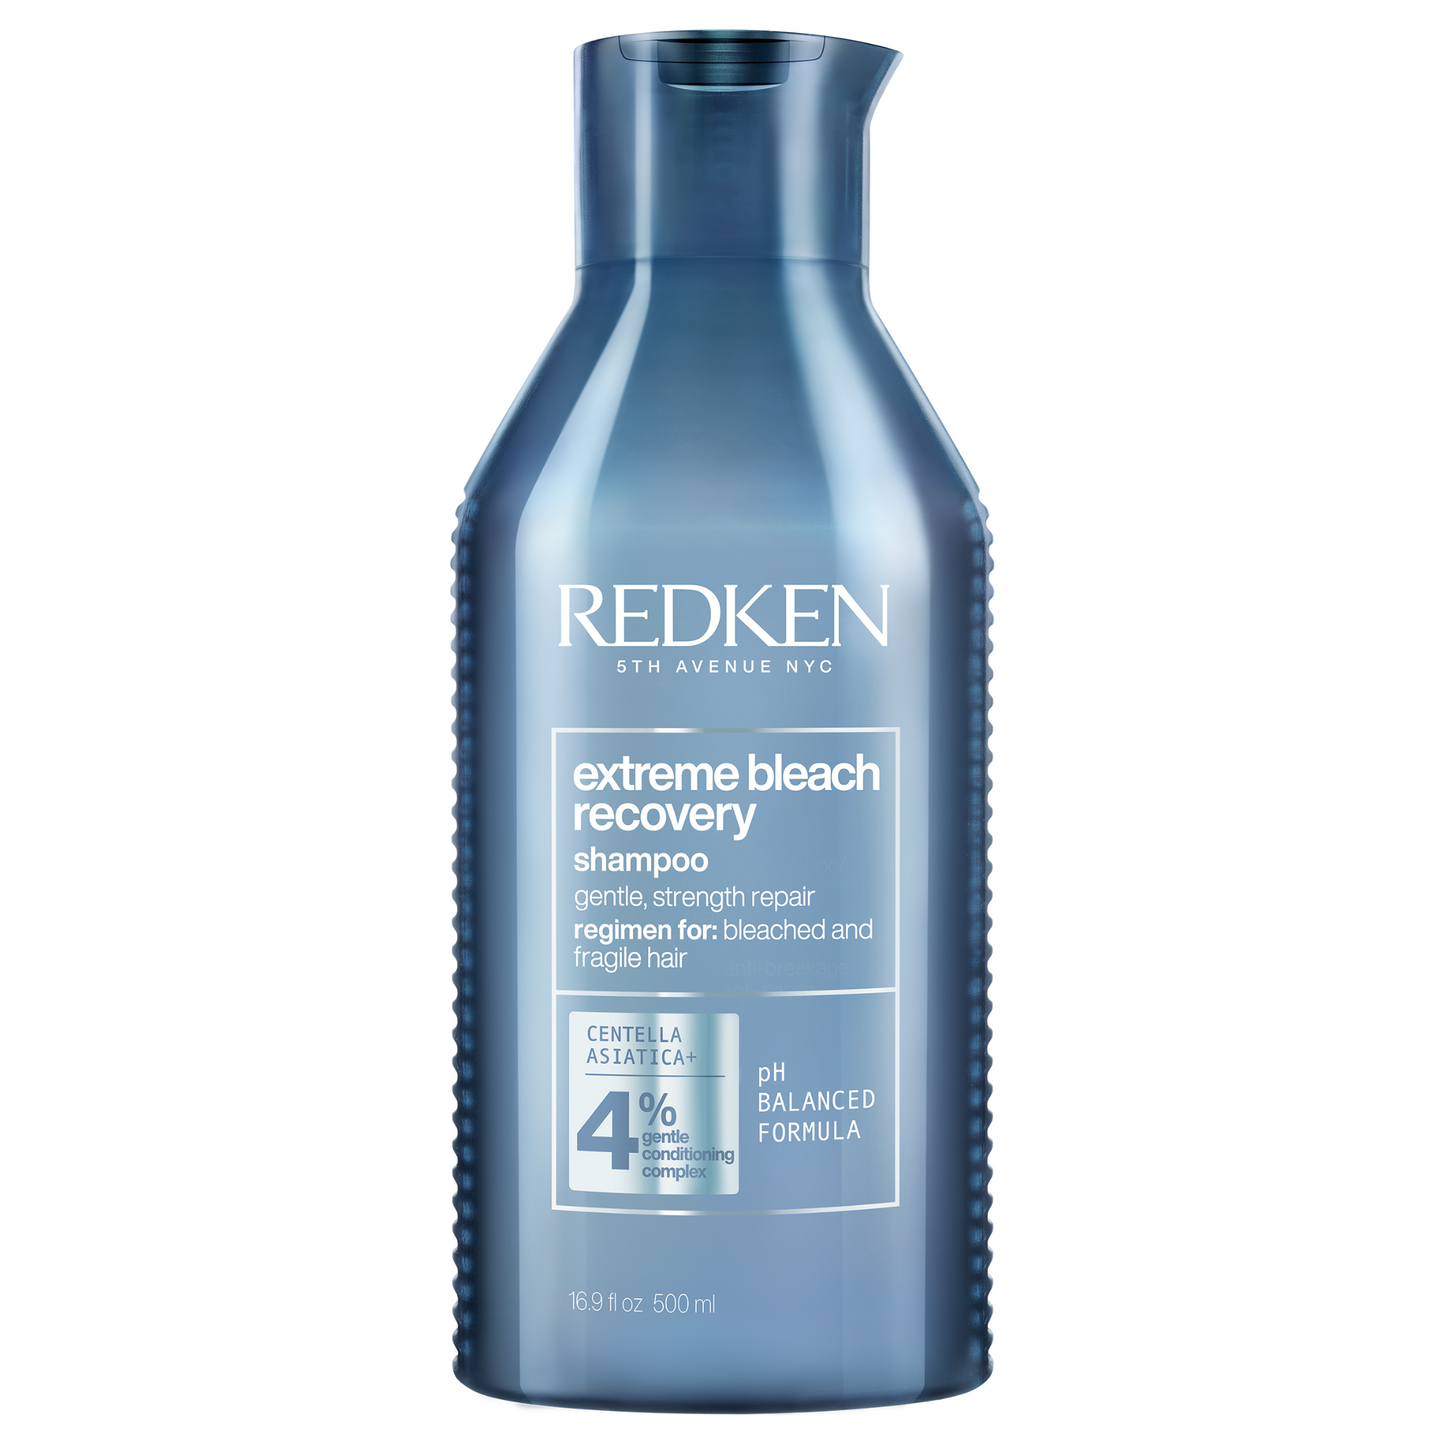 Redken Extreme Bleach Recovery Shampoo 16.9